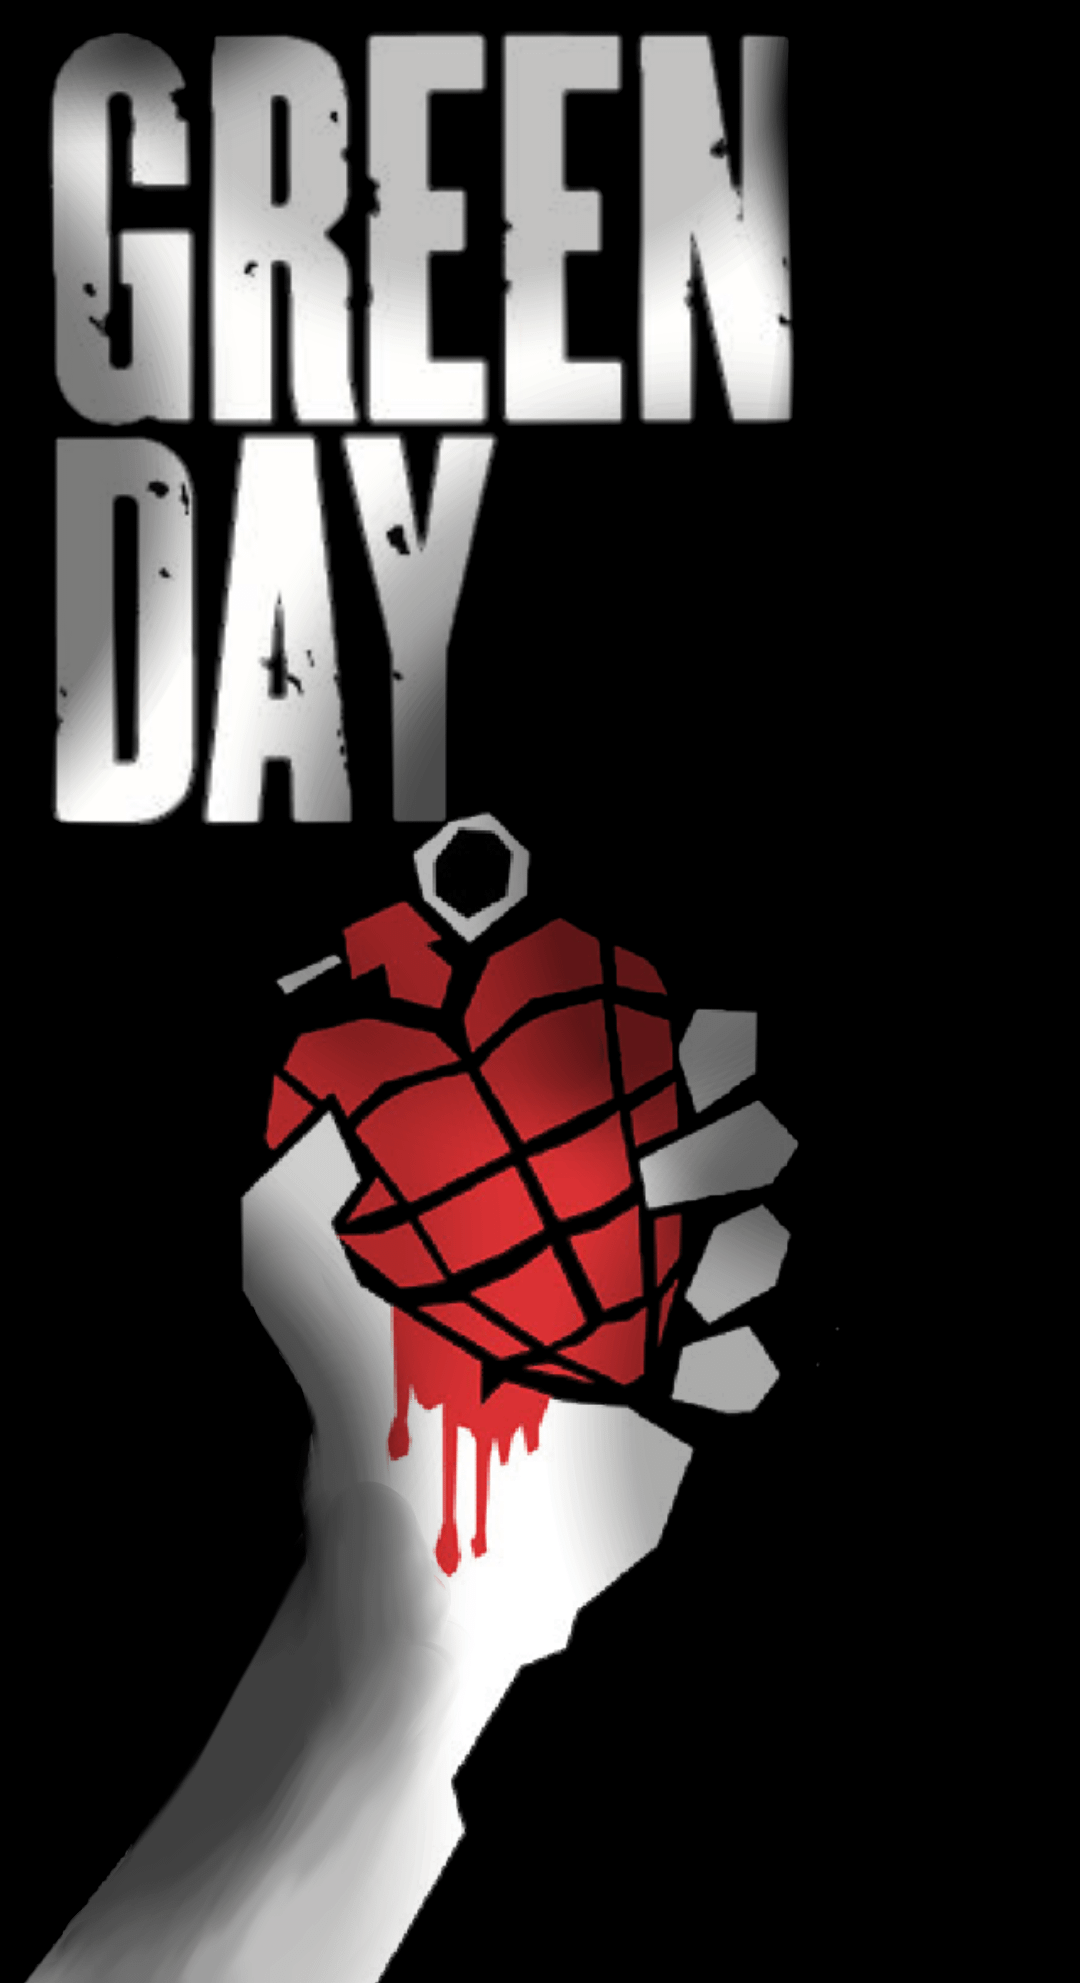 American Idiot Wallpaper R Greendayofficial